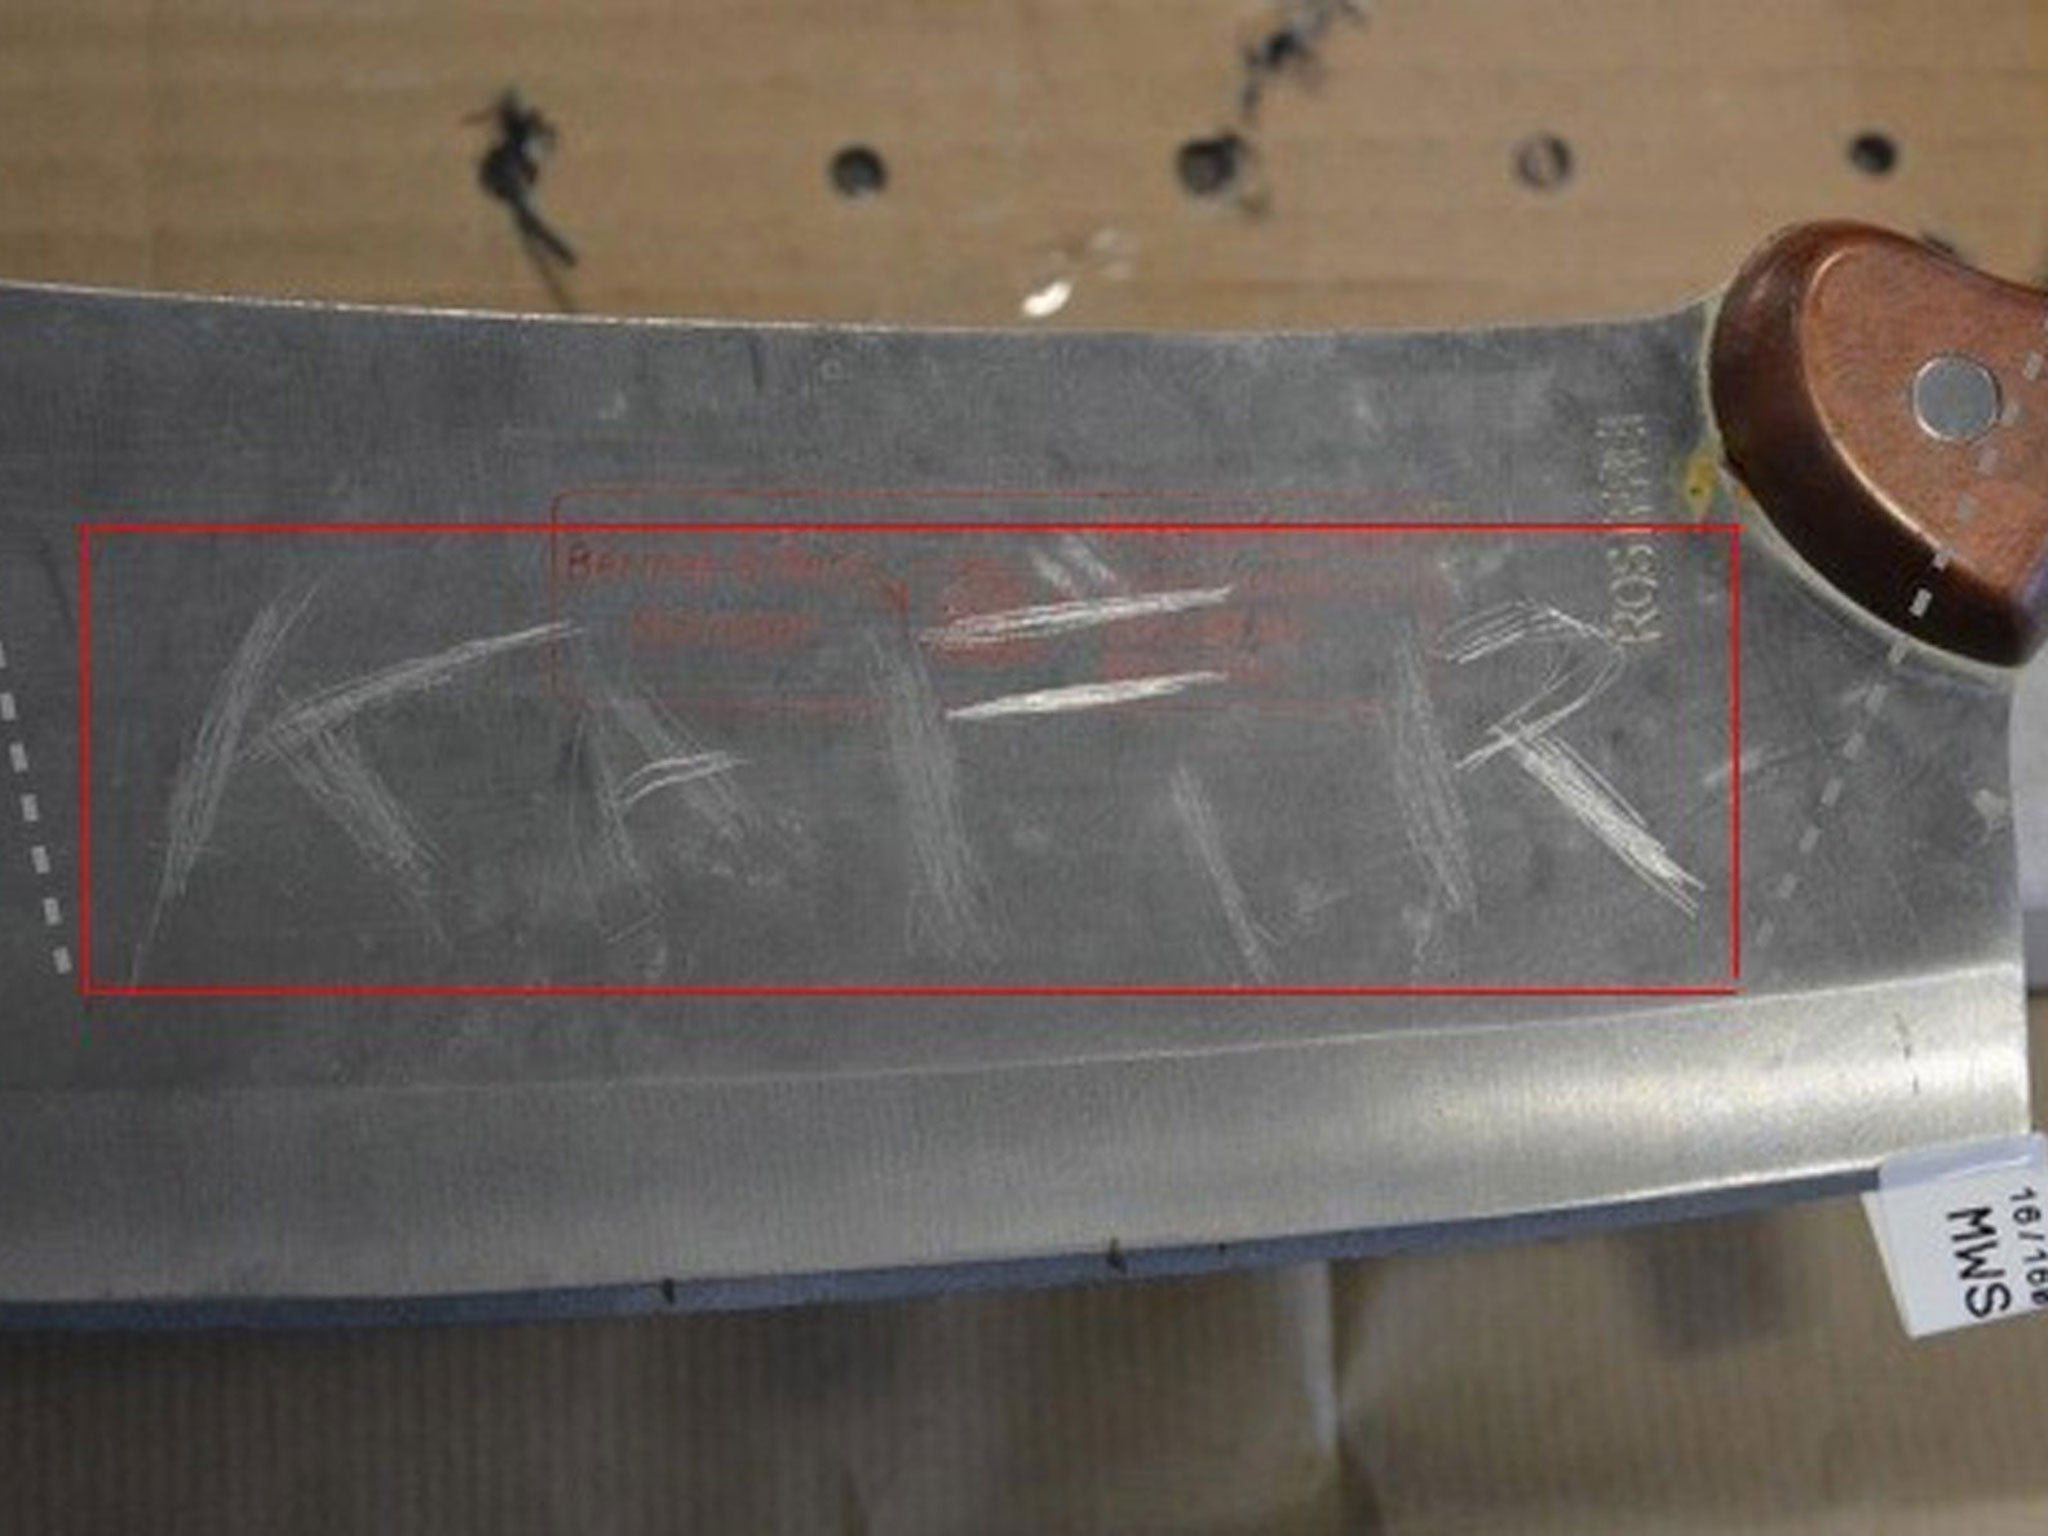 A meat cleaver that was found stashed in Naweed Ali's Seat Leon car, with the word kafir (Arabic for non-believer or infidel) scratched on the blade